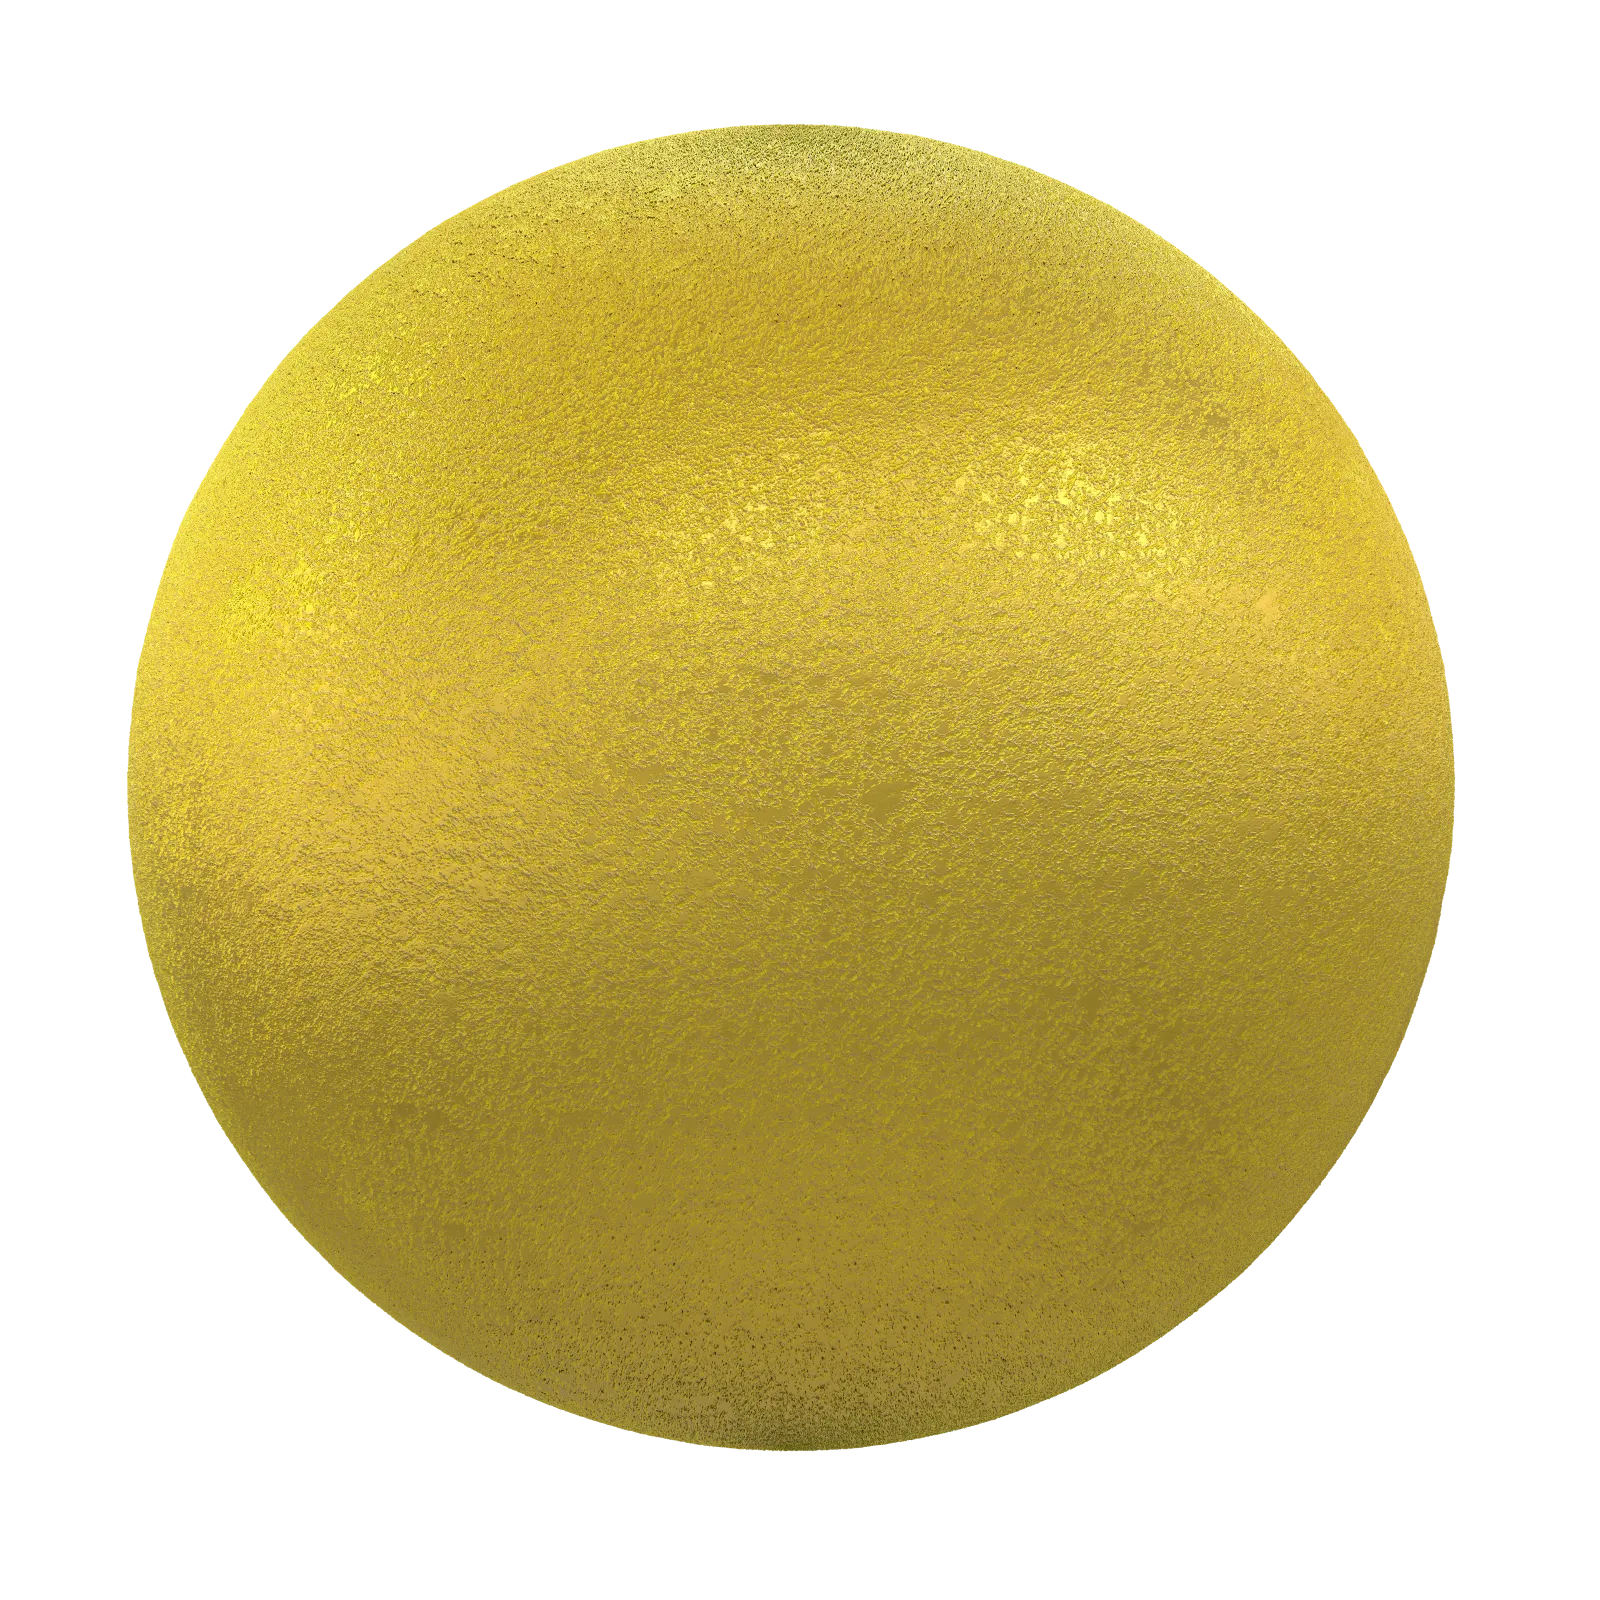 PBR CGAXIS TEXTURES – METALS – Wrinkled Gold Foil 01